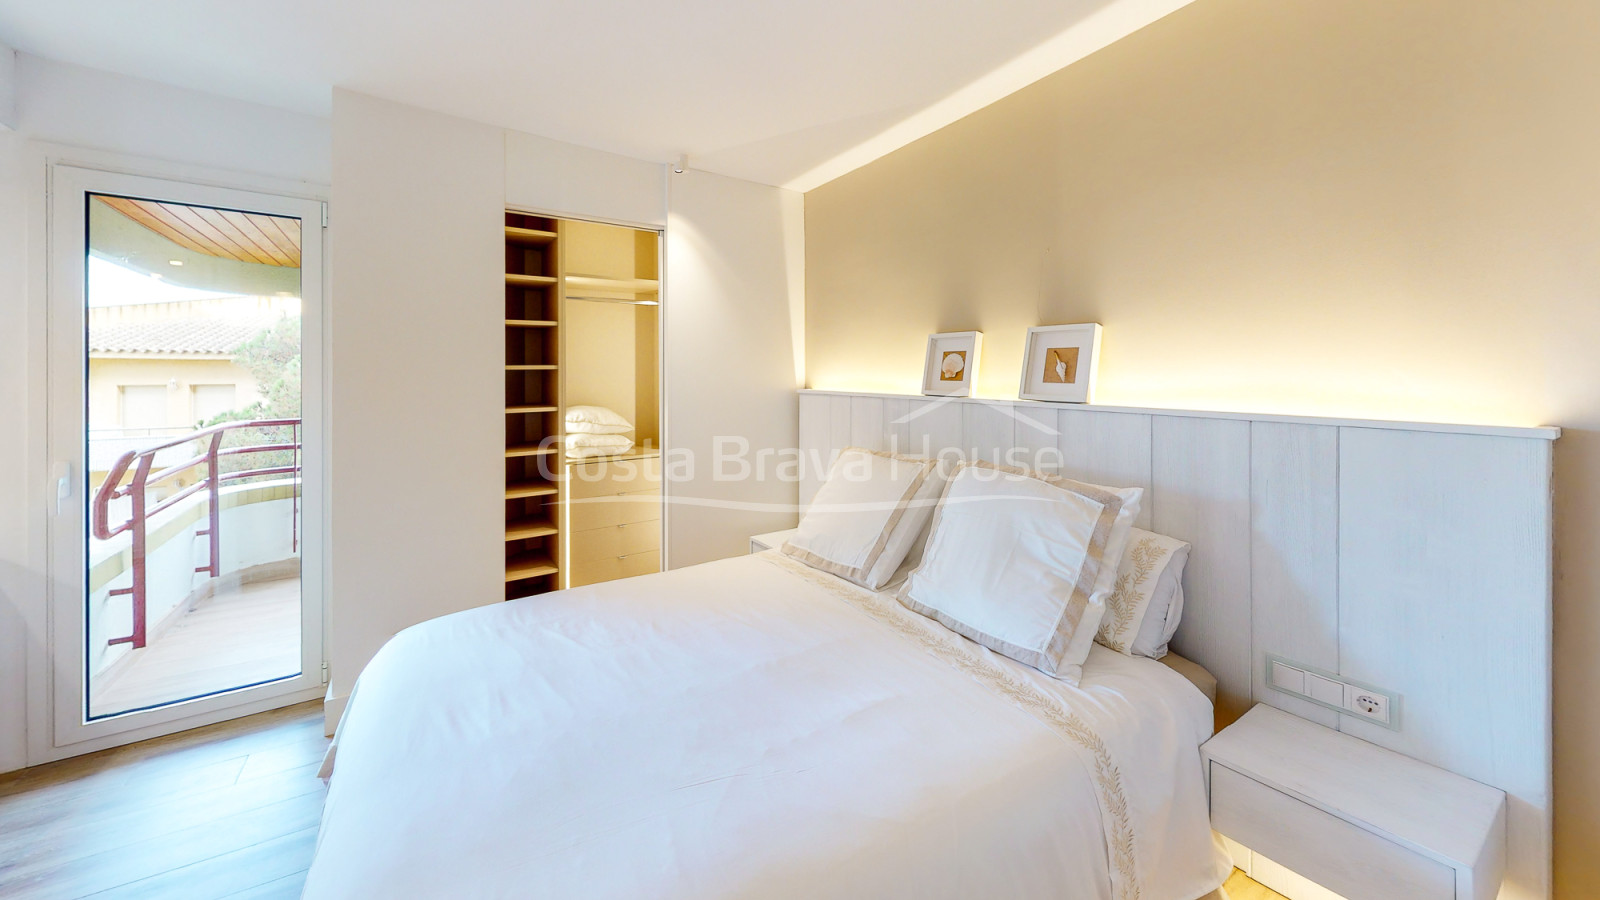 High standard apartment for sale in Platja d'Aro, steps from the beach and the sea